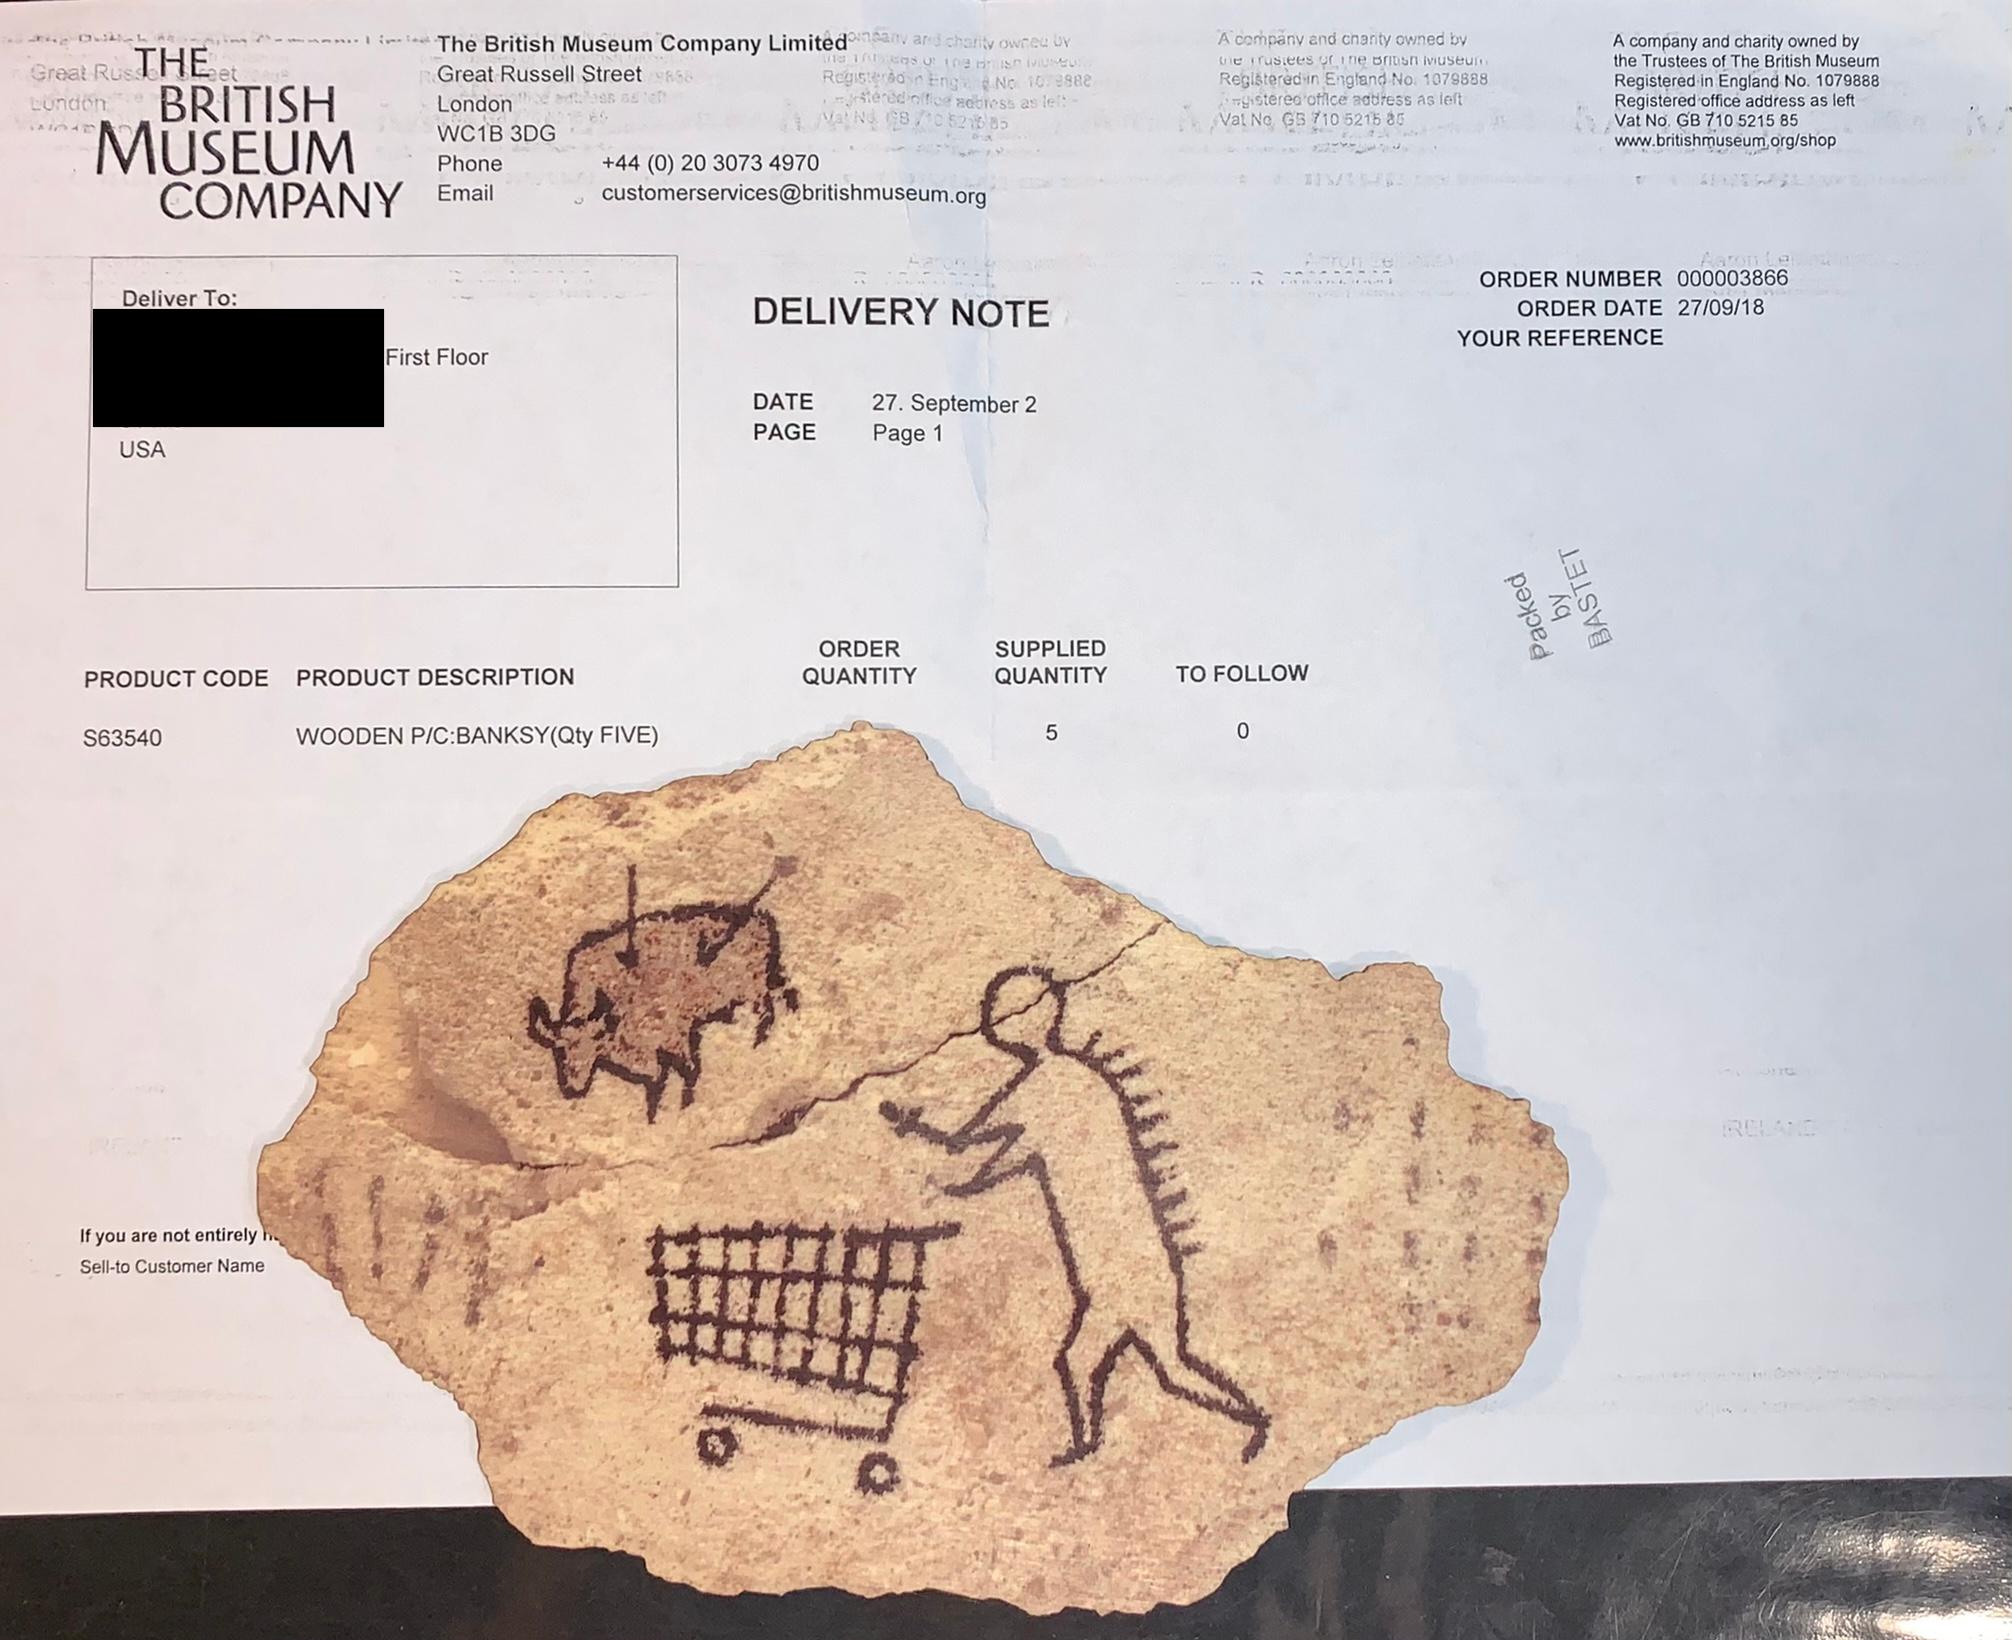 A wooden replica of Banksy's "Peckham Rock" wall art.

"Banksy's 'Peckham Rock' is a piece of concrete showing a supposed prehistoric figure pushing a shopping trolley. This was placed in The British Museum in 2005, accompanied by an authentic